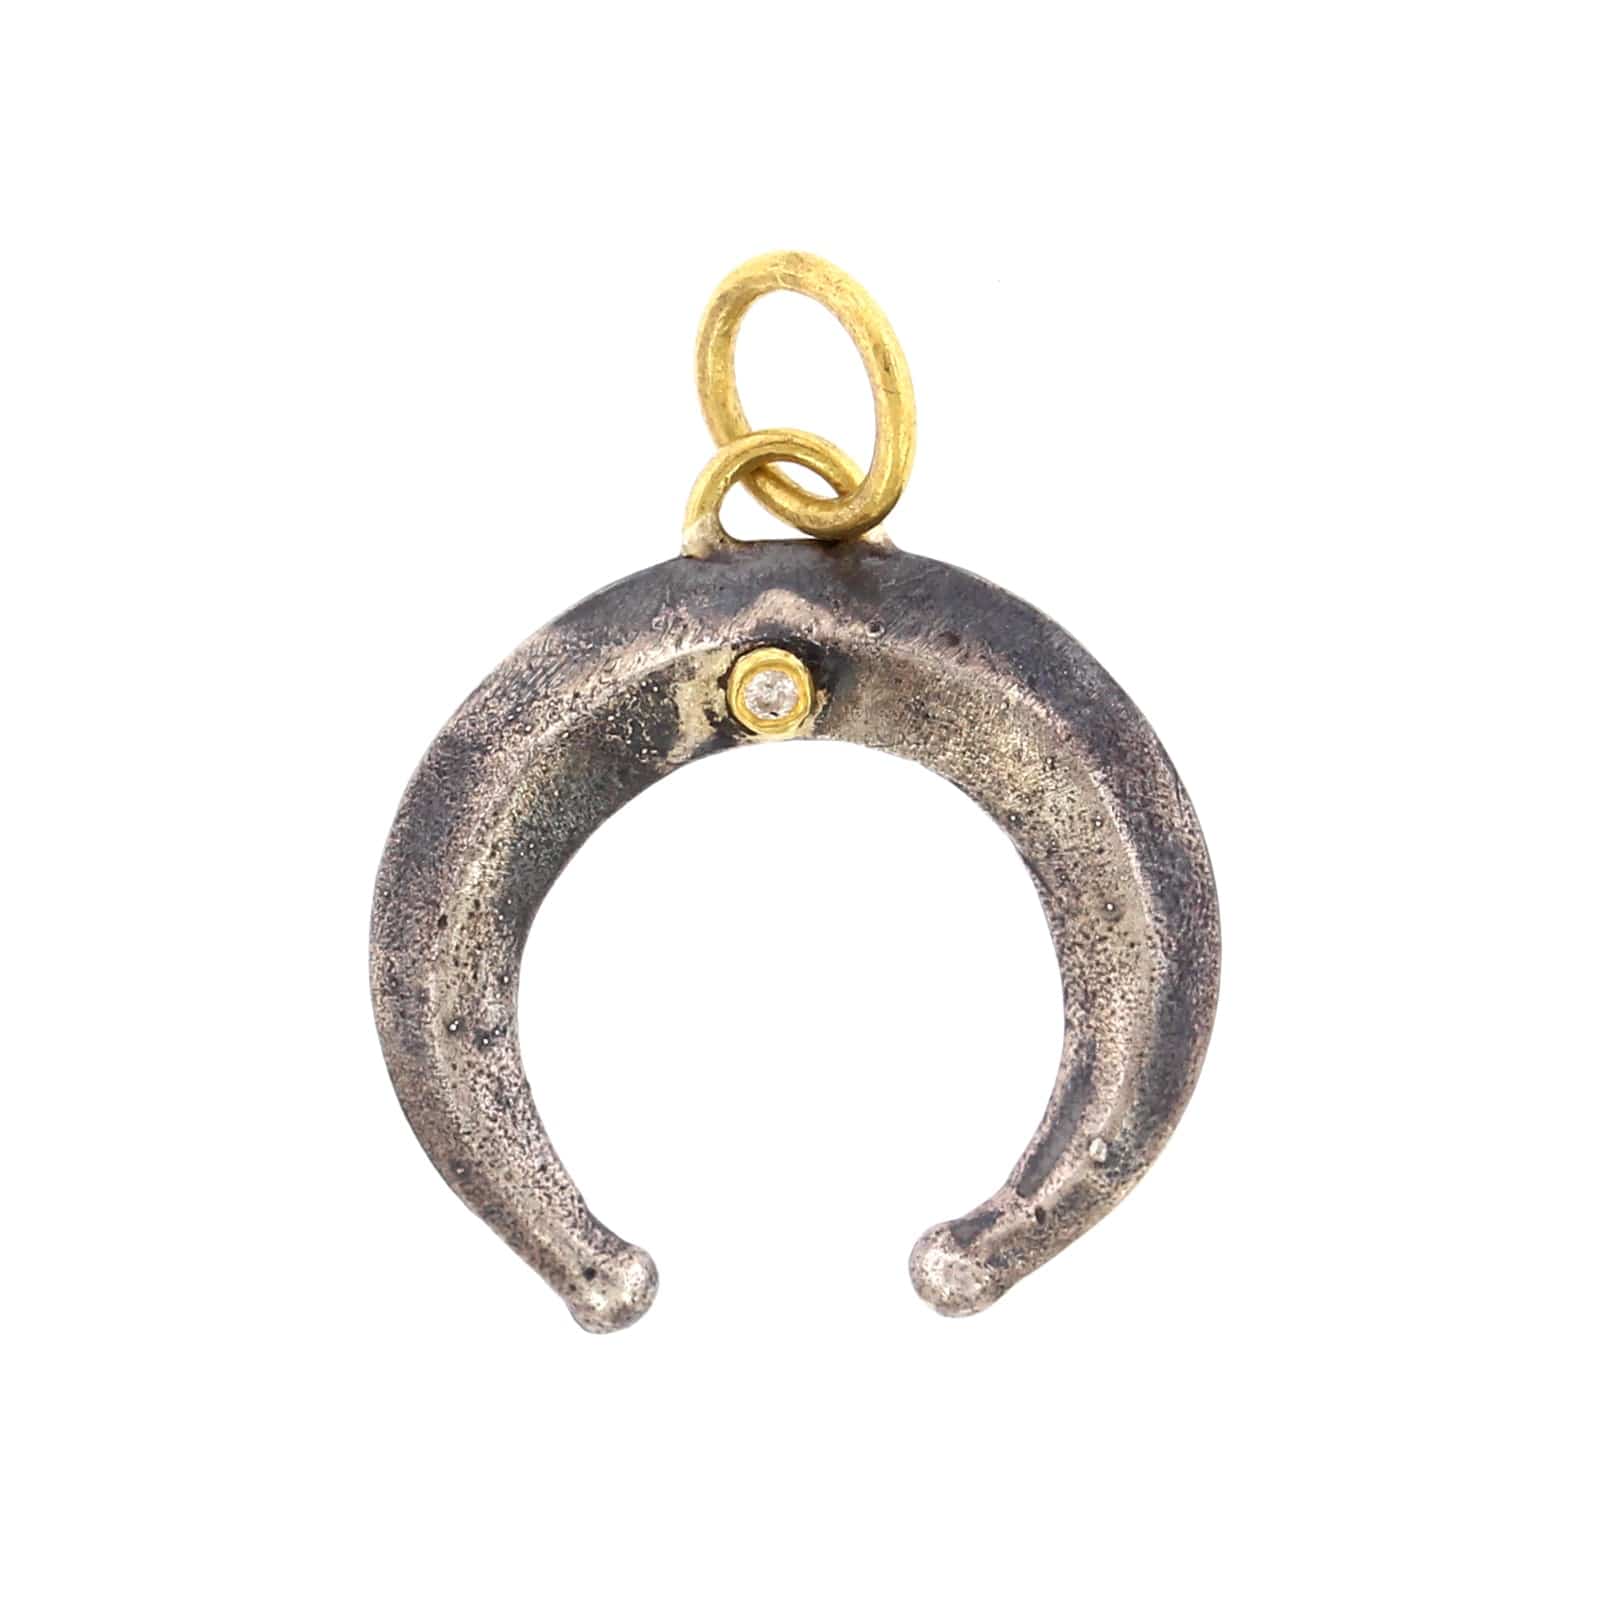 24K Yellow Gold and Sterling Silver Horse Shoe Charm